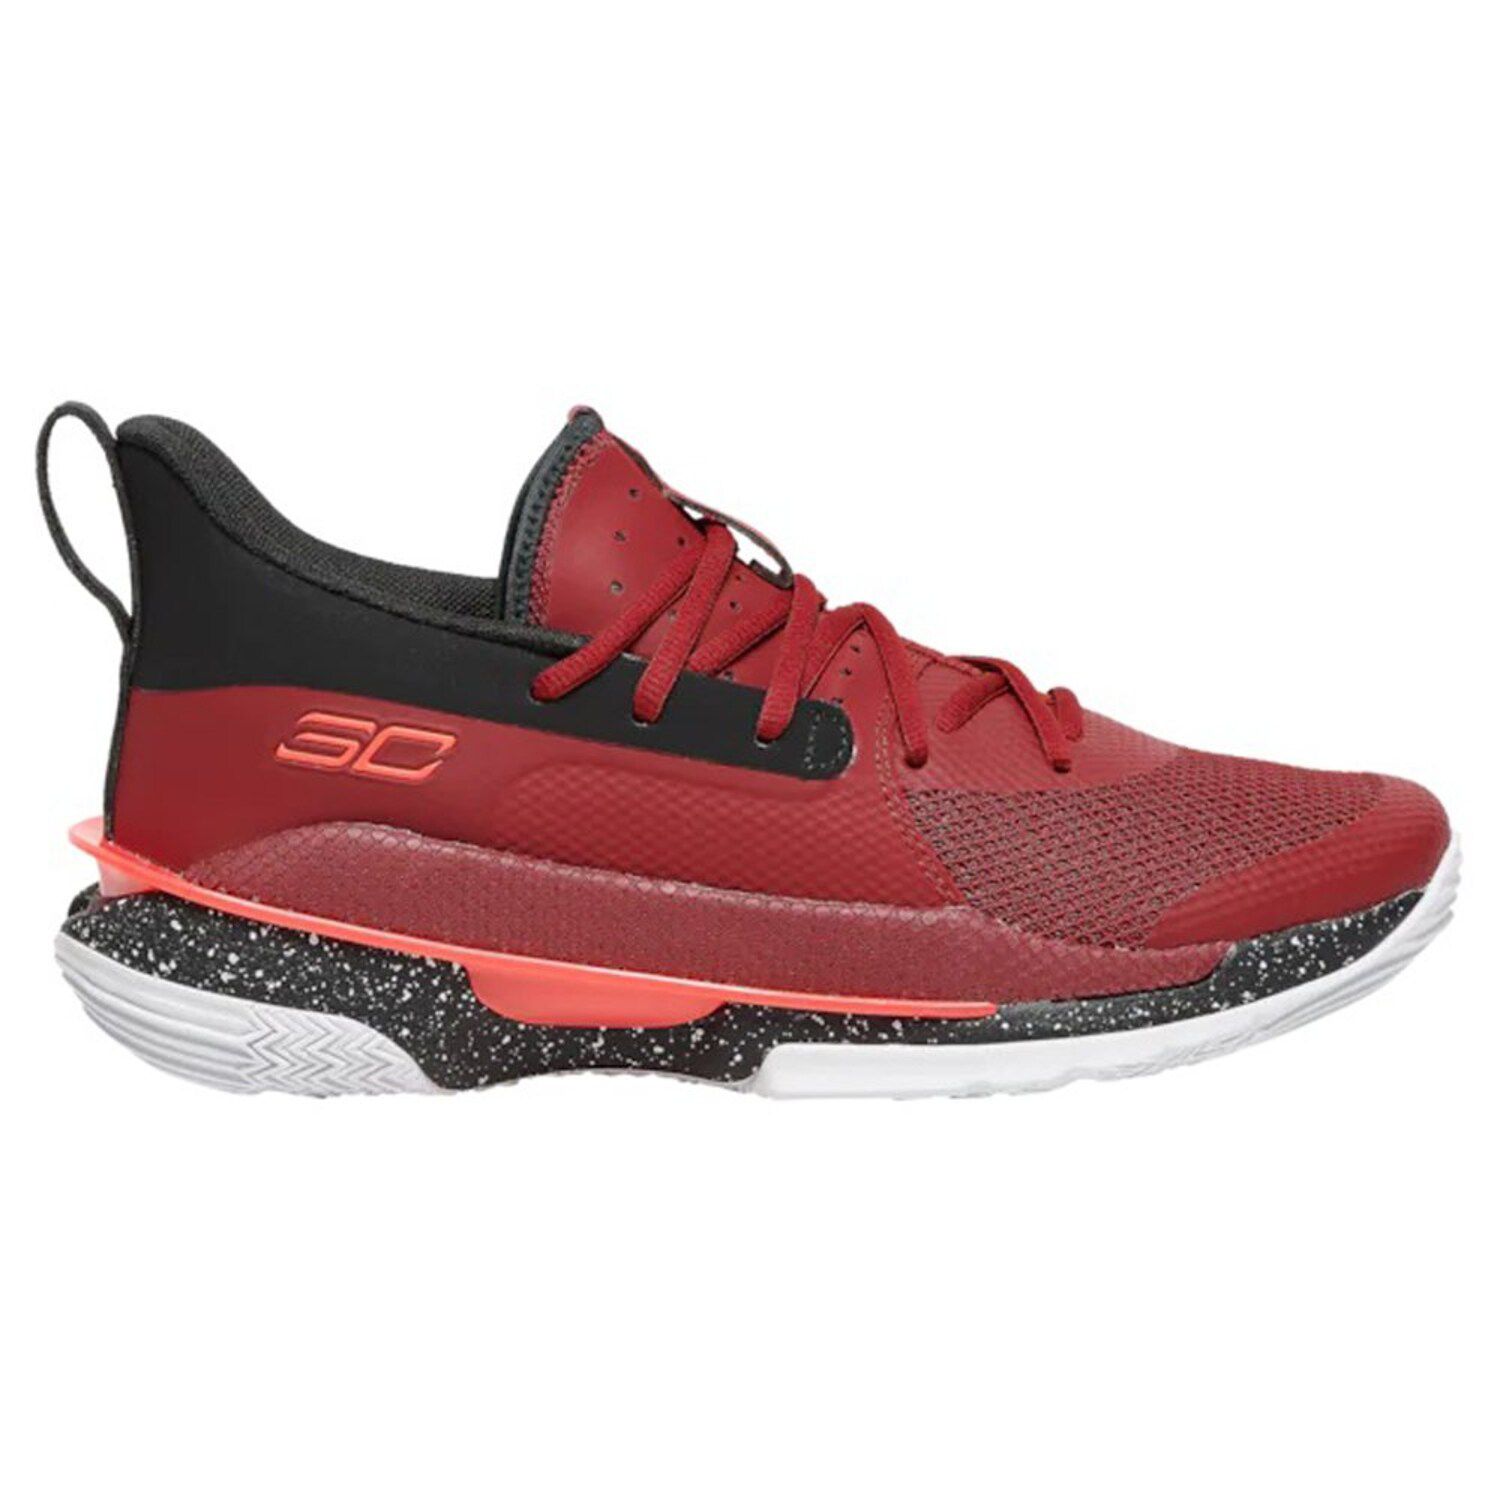 Under Armour Red Curry 7 Basketball Shoes